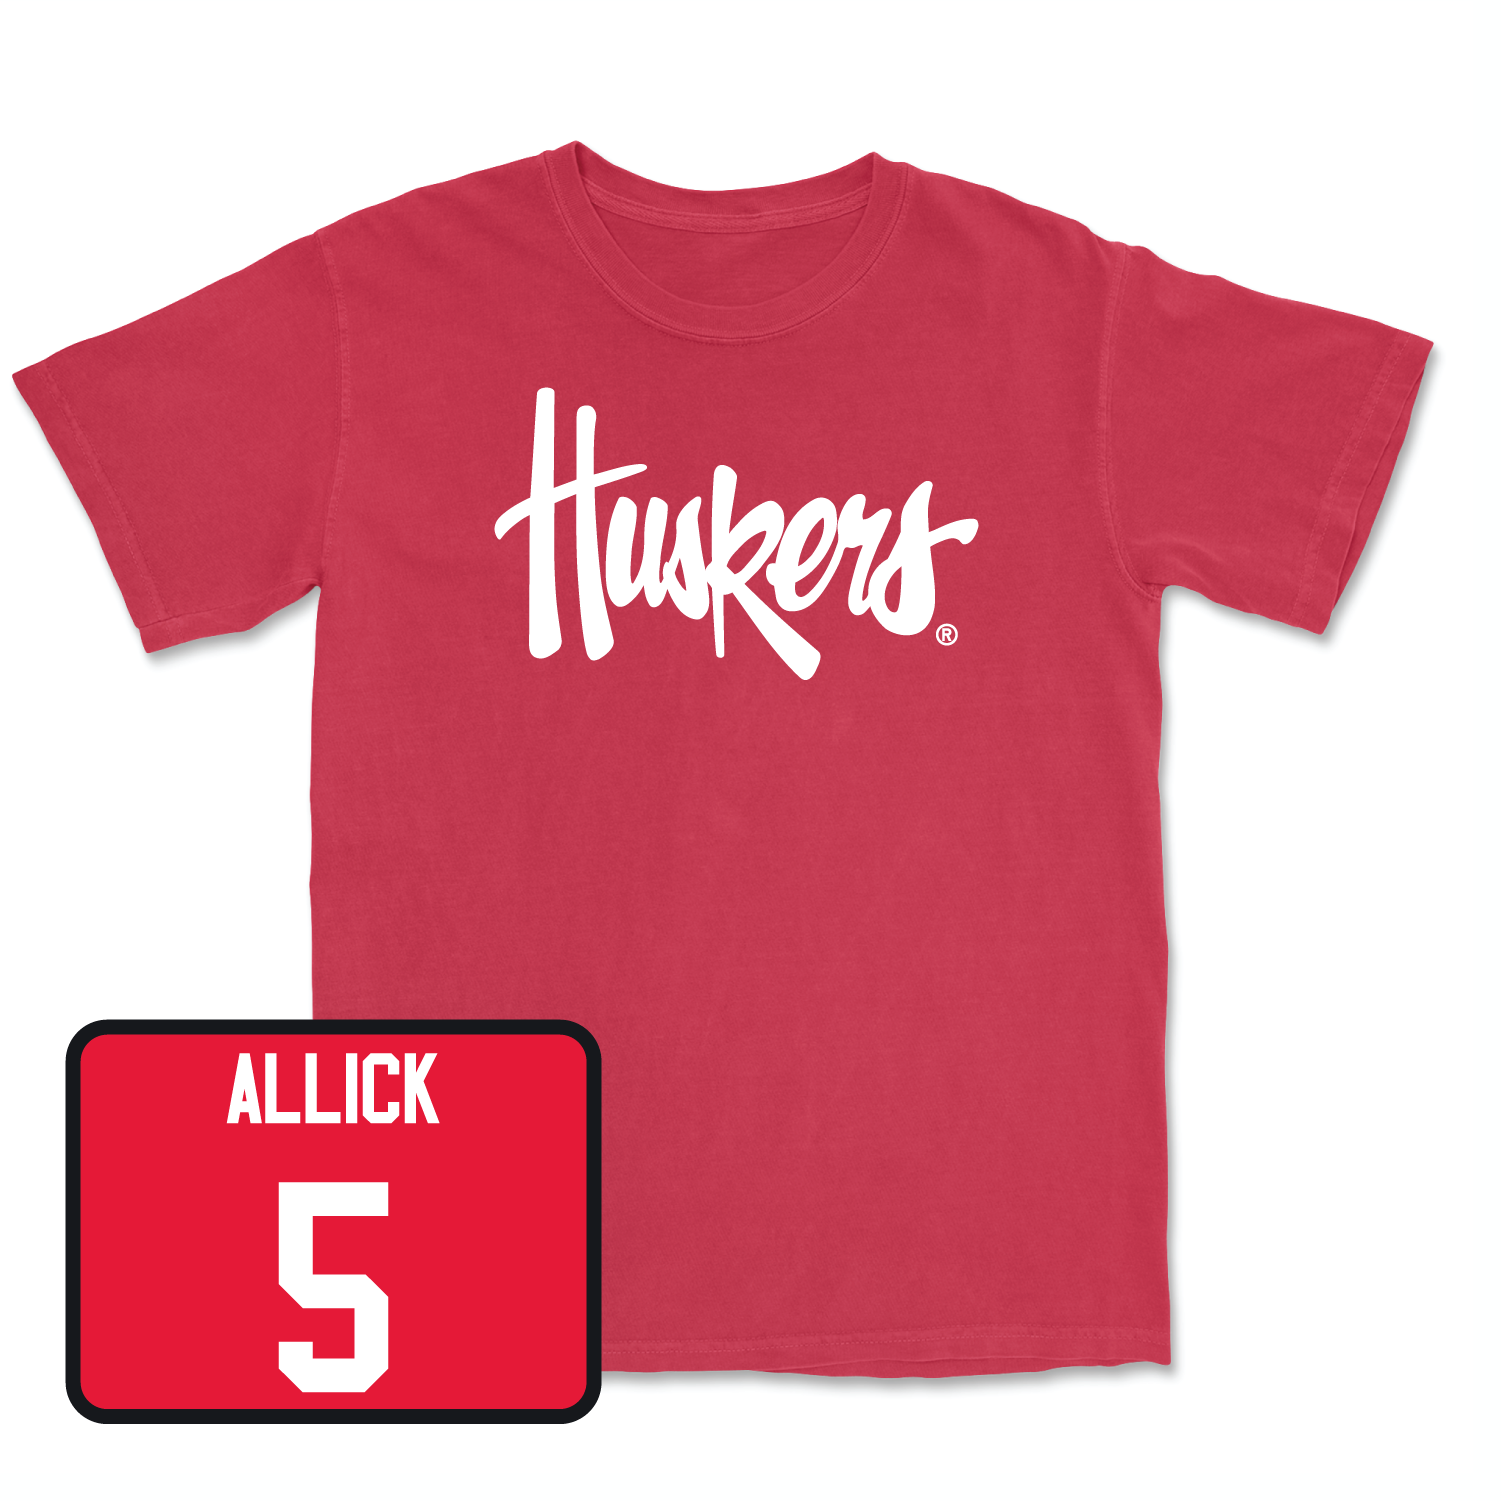 Red Women's Volleyball Huskers Tee 4X-Large / Rebekah Allick | #5